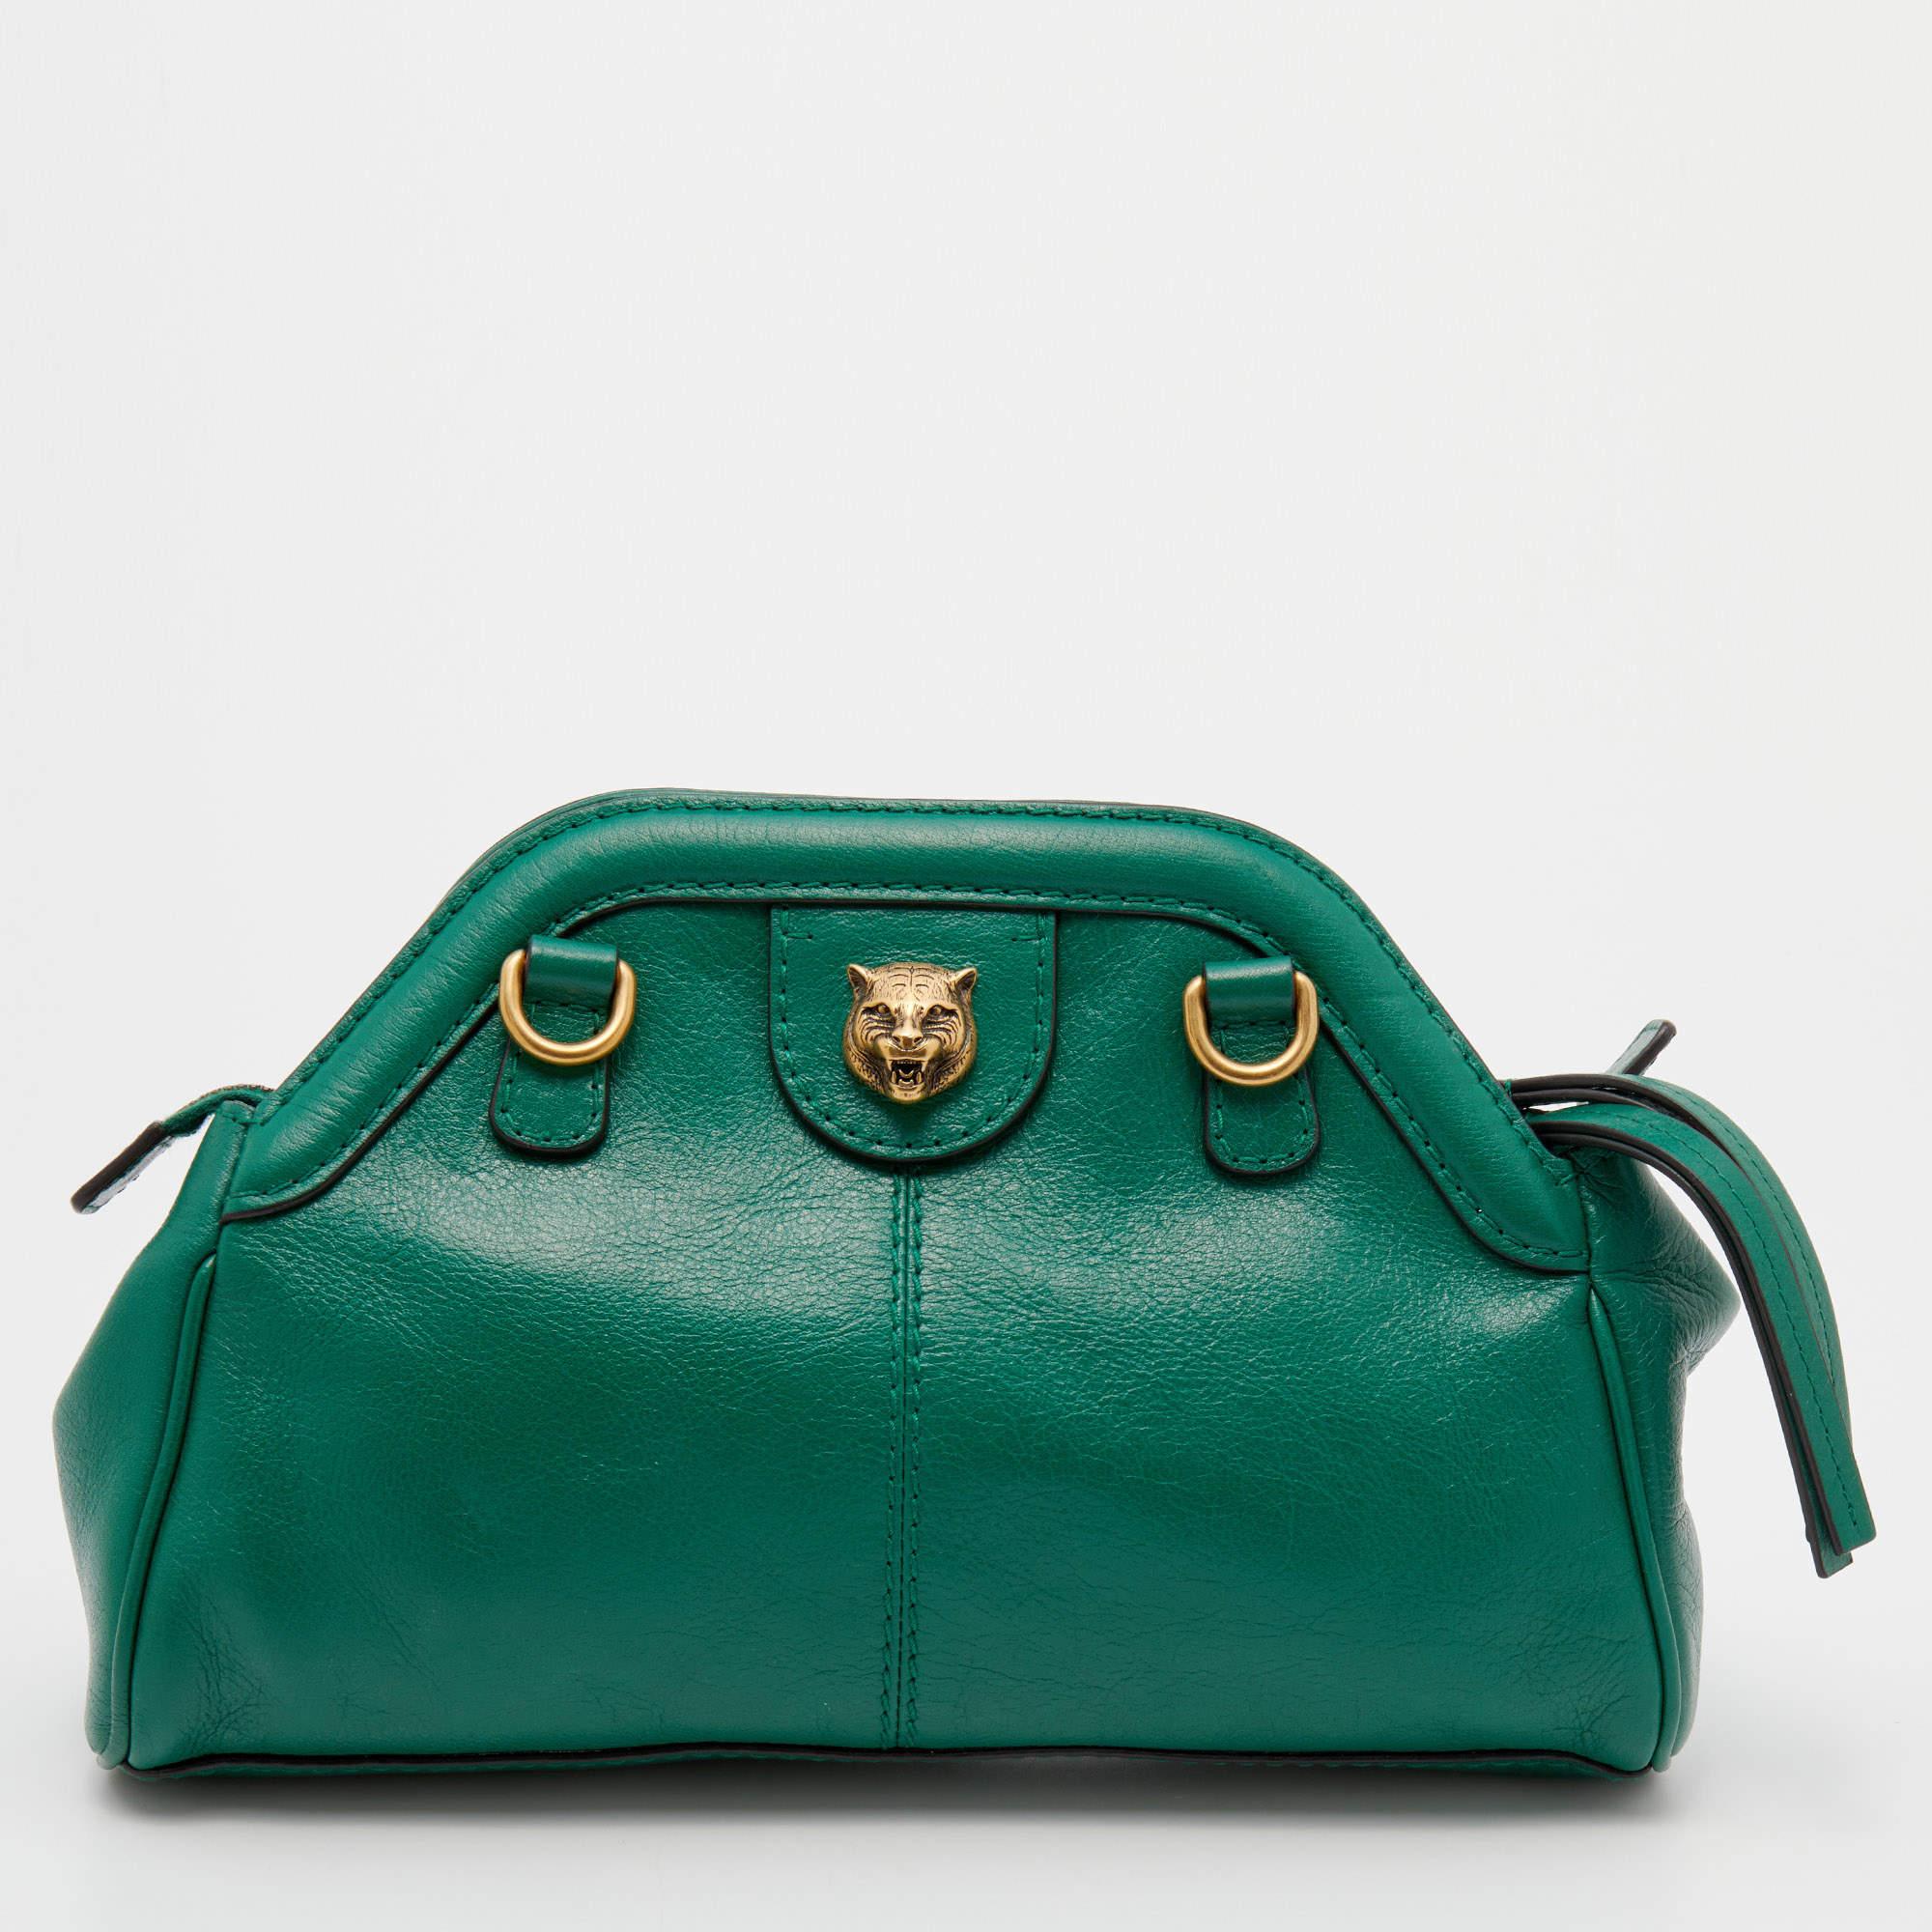 Now here's a bag that is both chic and functional! Gucci brings us this gorgeous shoulder bag that has been crafted from green leather and is designed with a front that carries a logo detail and a zipper that opens up to a suede interior capable of